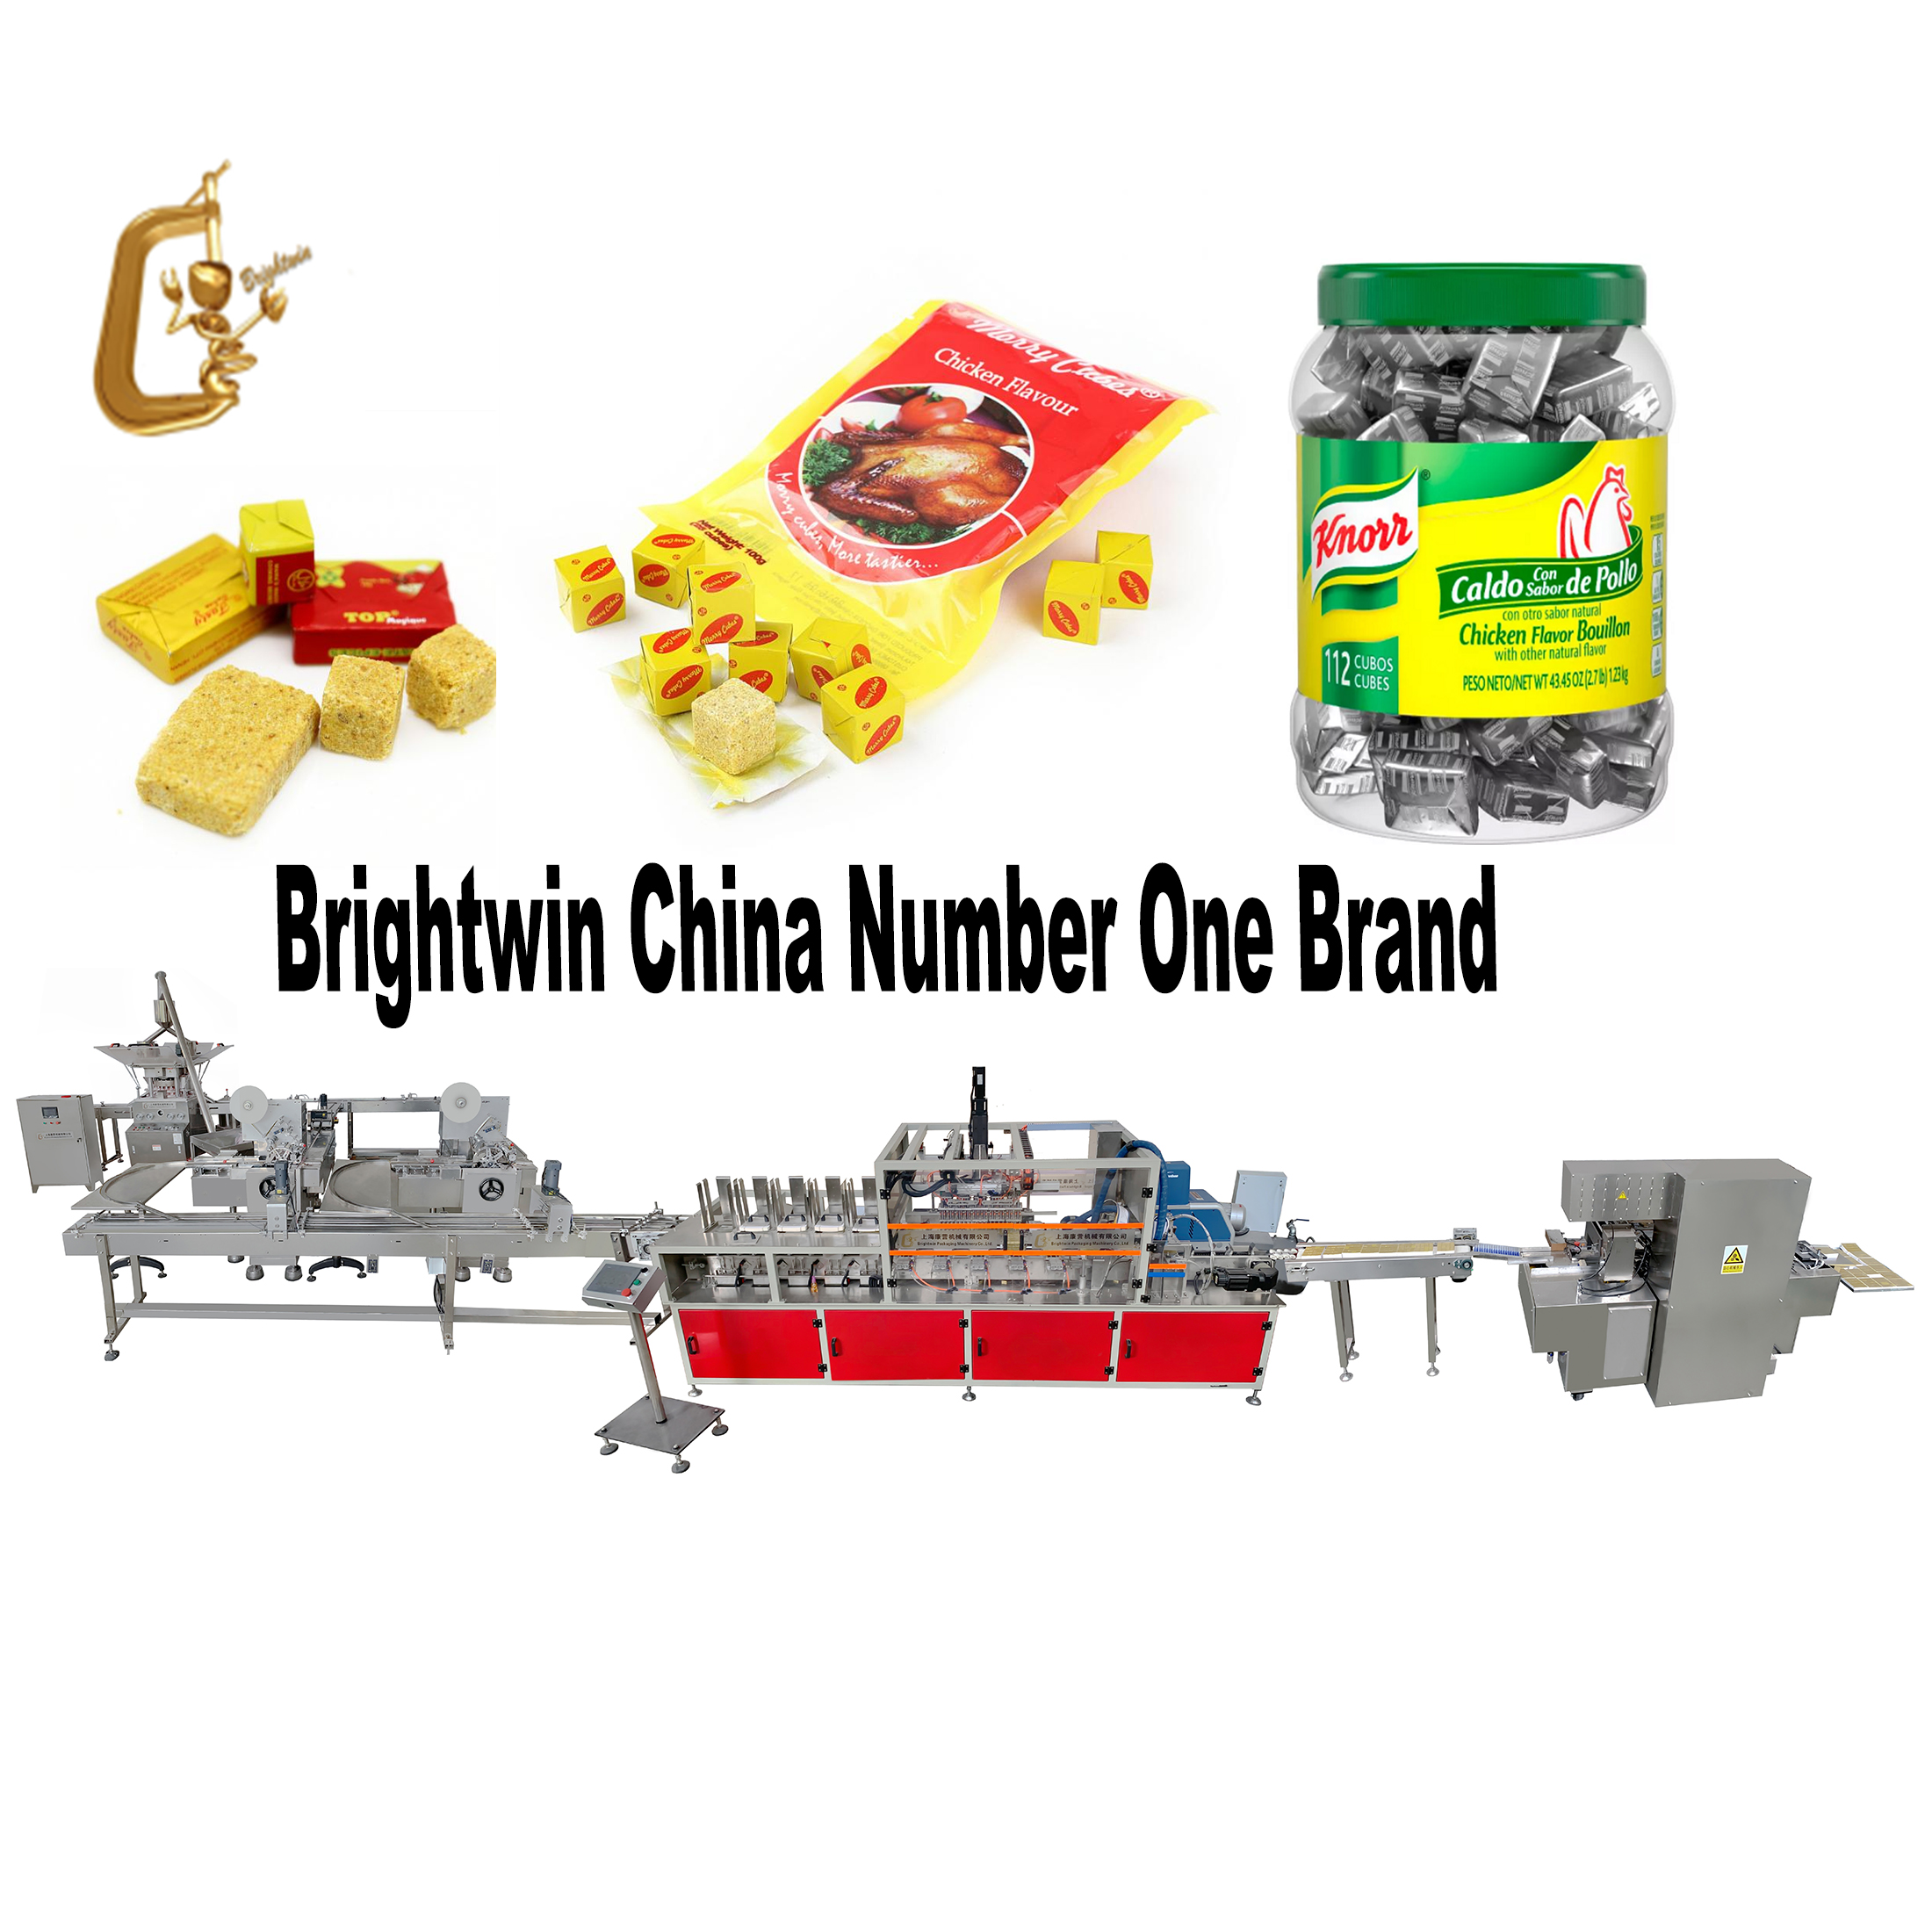 Brightwin Factory Directly Sale Chicken Broth Seasoning Pressing Machine Bouillon Cube Chicken Stock Tablets Cube Soup Cubes 4g 10g 12g Pressing Wrapping Boxing Packing Processing Equipment Machine Featured Image